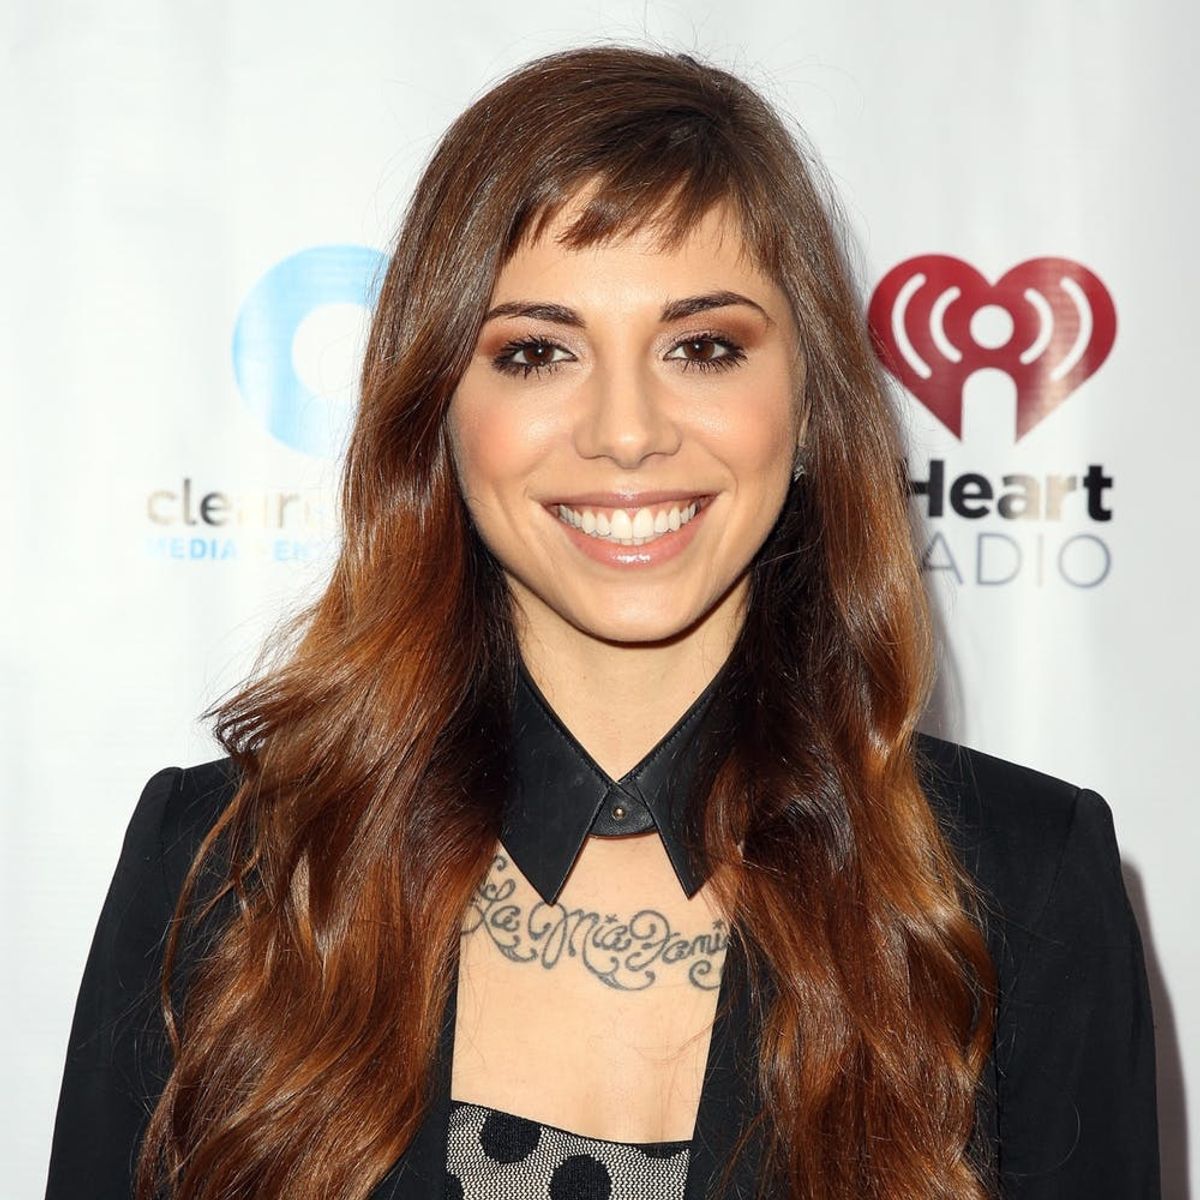 Christina Perri and Paul Costabile Are Married!